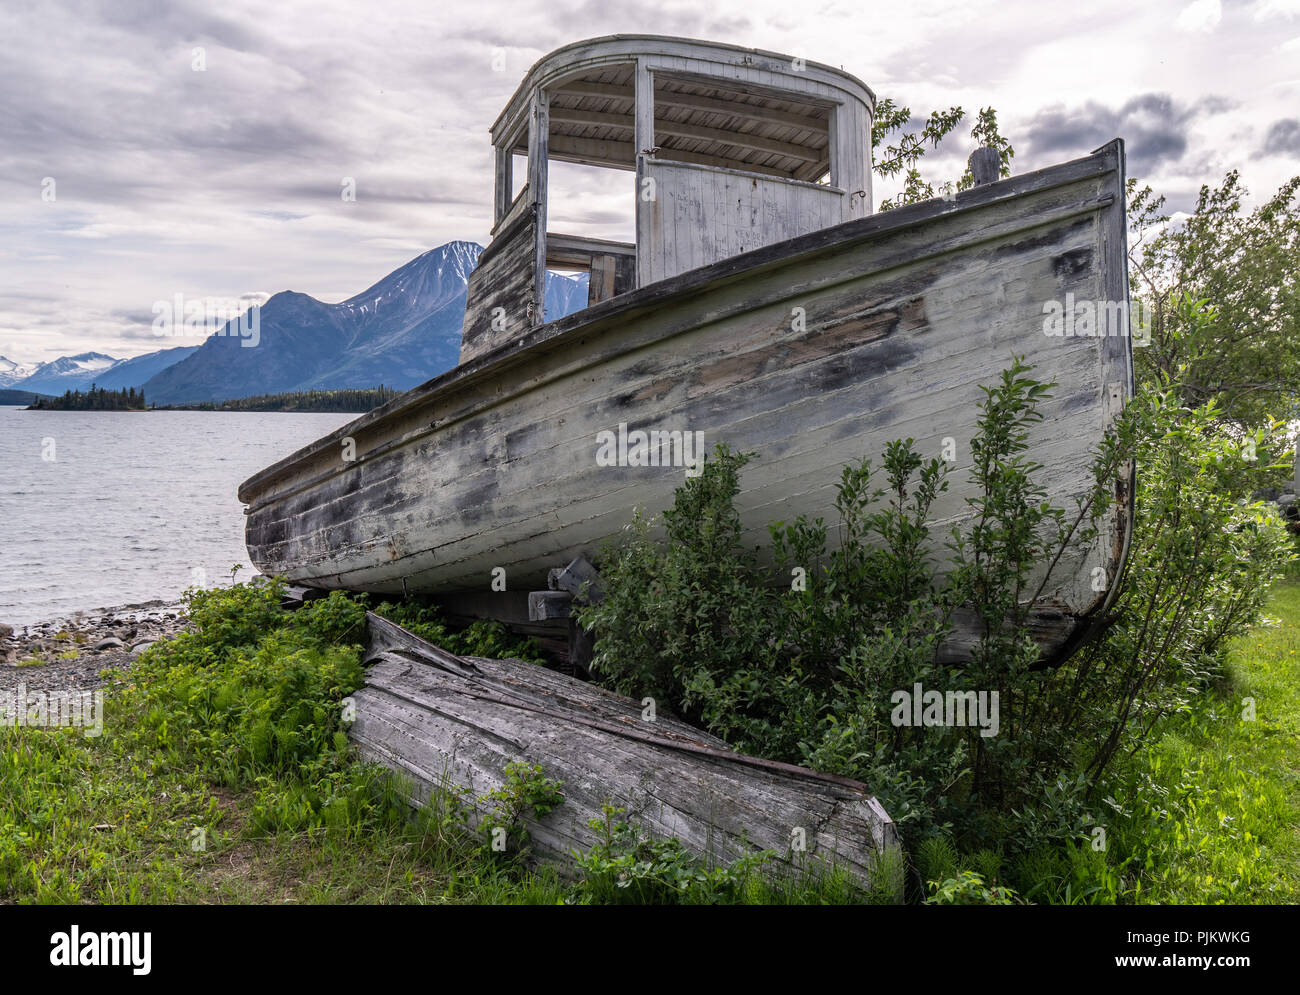 Atlin, once a busy mining comunity turned into tourist atraction, now it is a quite community on the shore of Atlin lake. Here an old boat resting on  Stock Photo